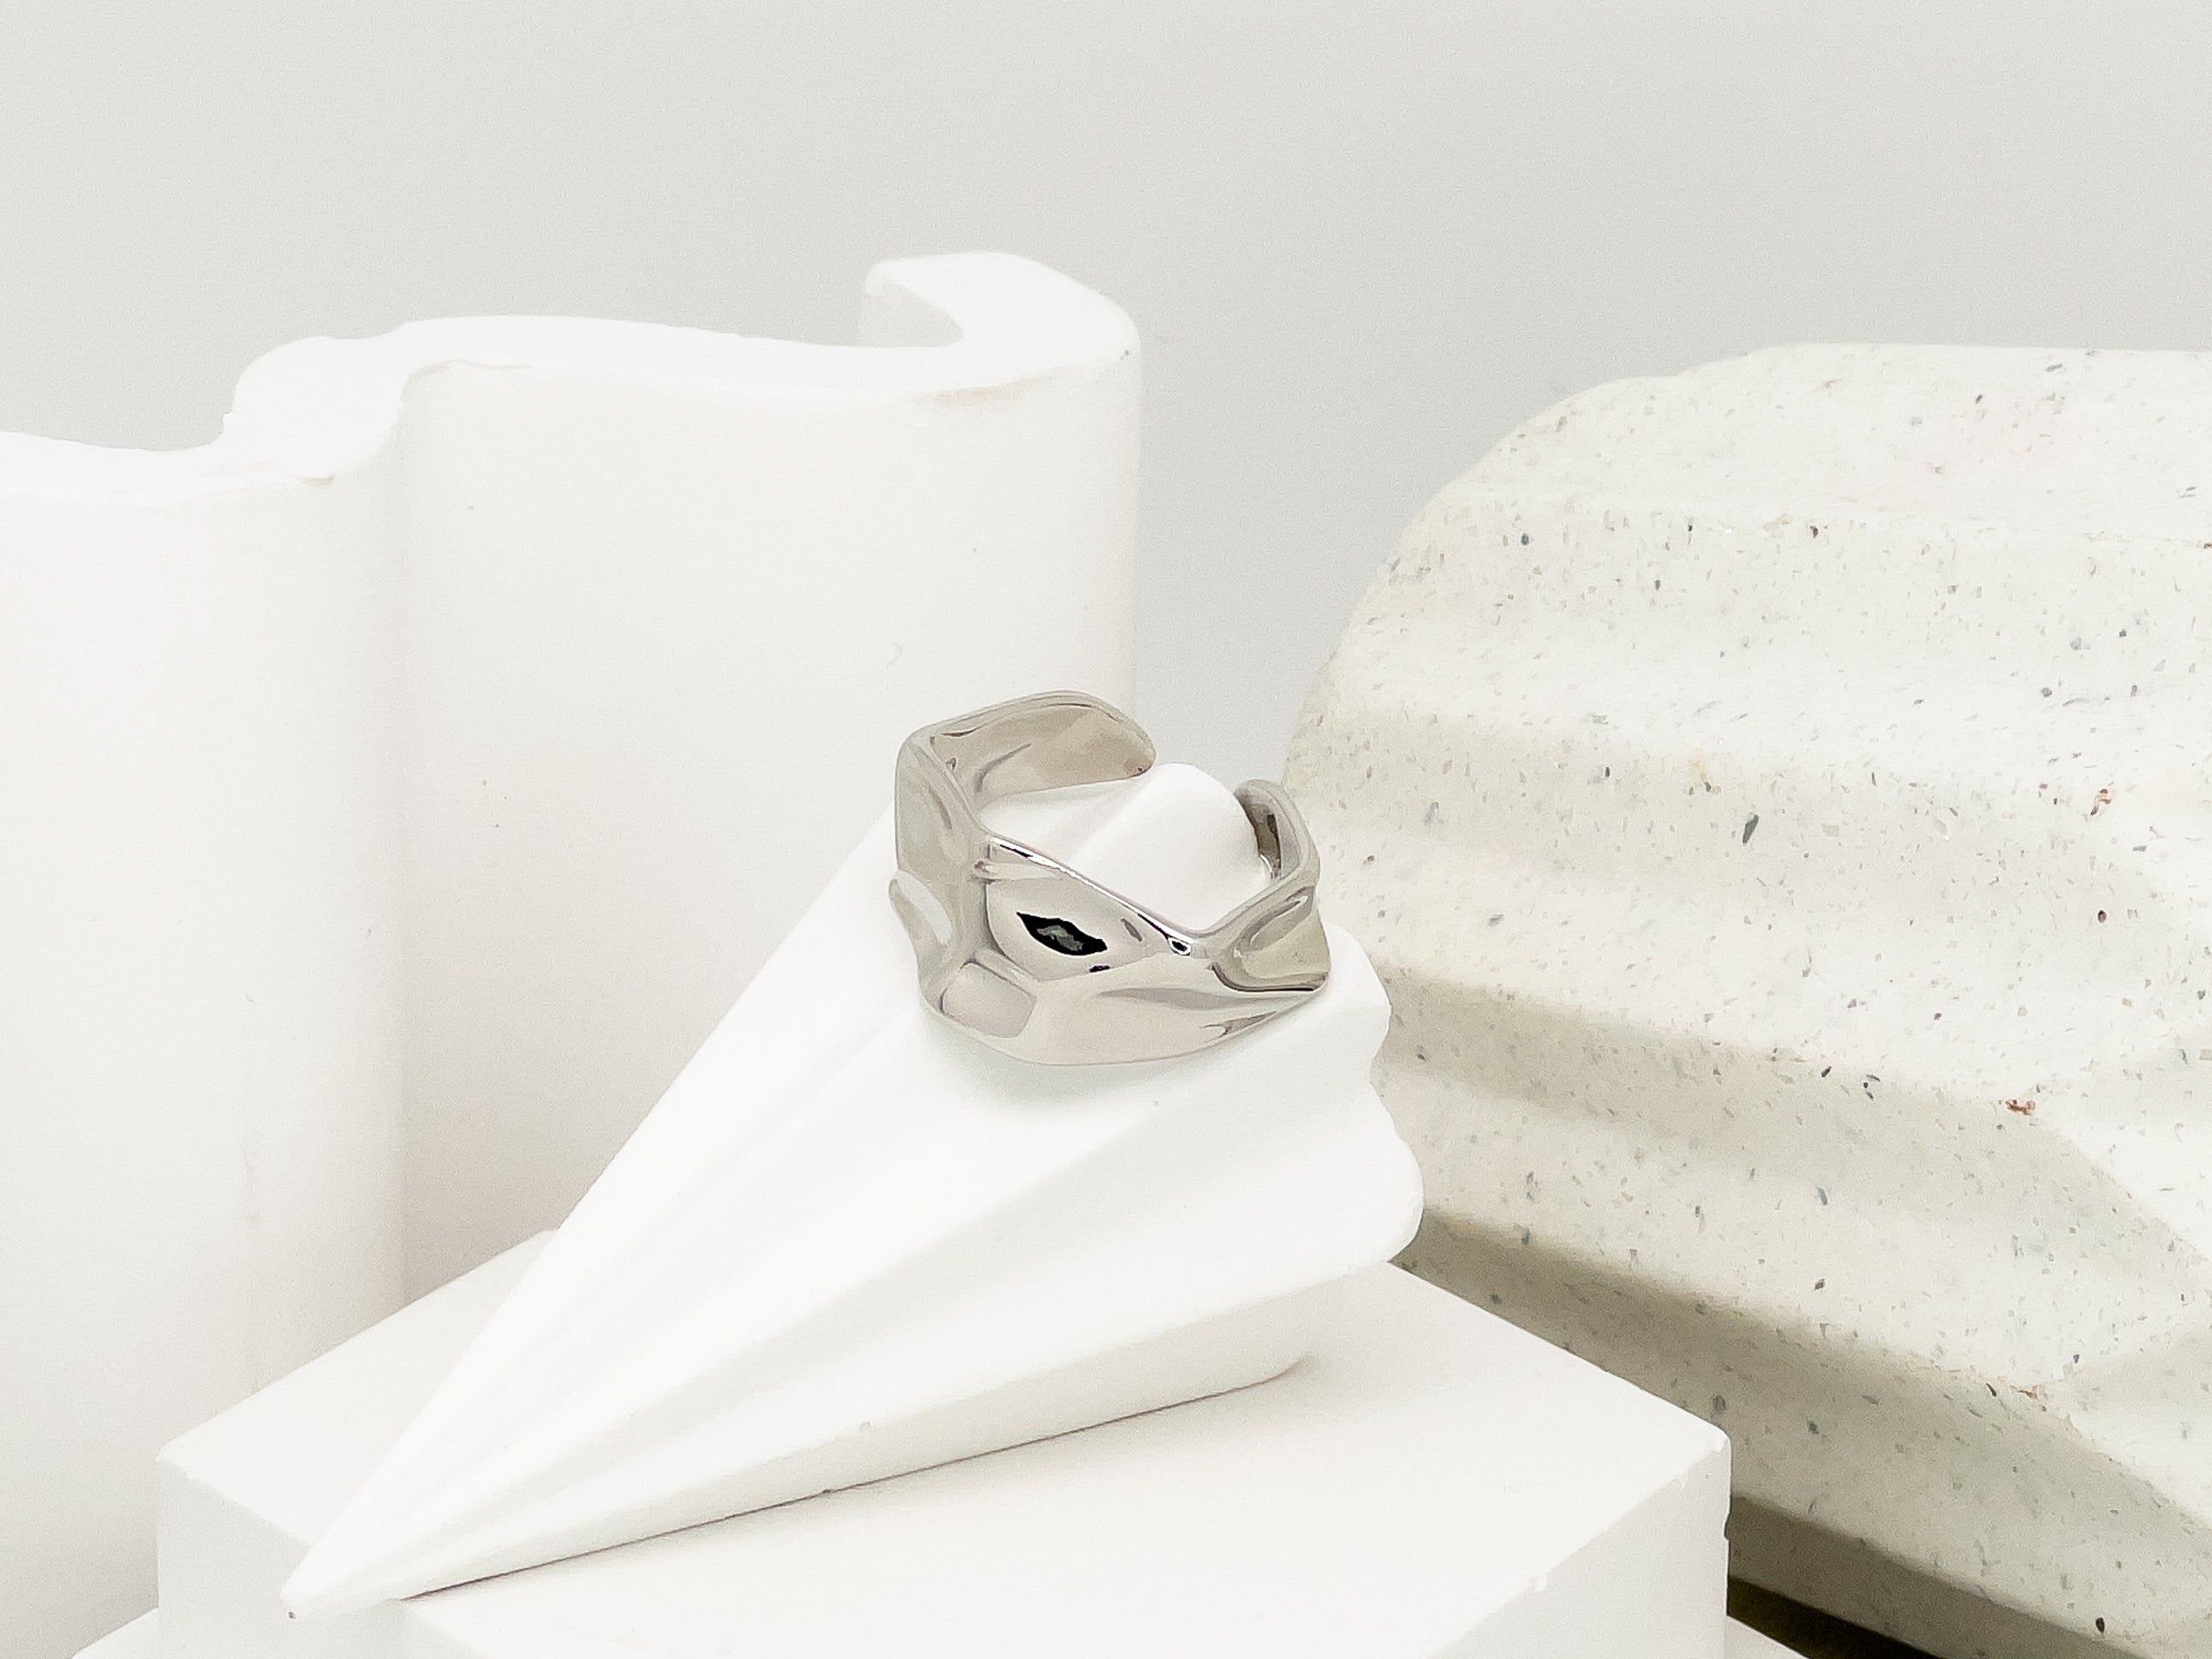 Burrata Hammered Silver Ring - Everyday Jewelry | chic chic bon